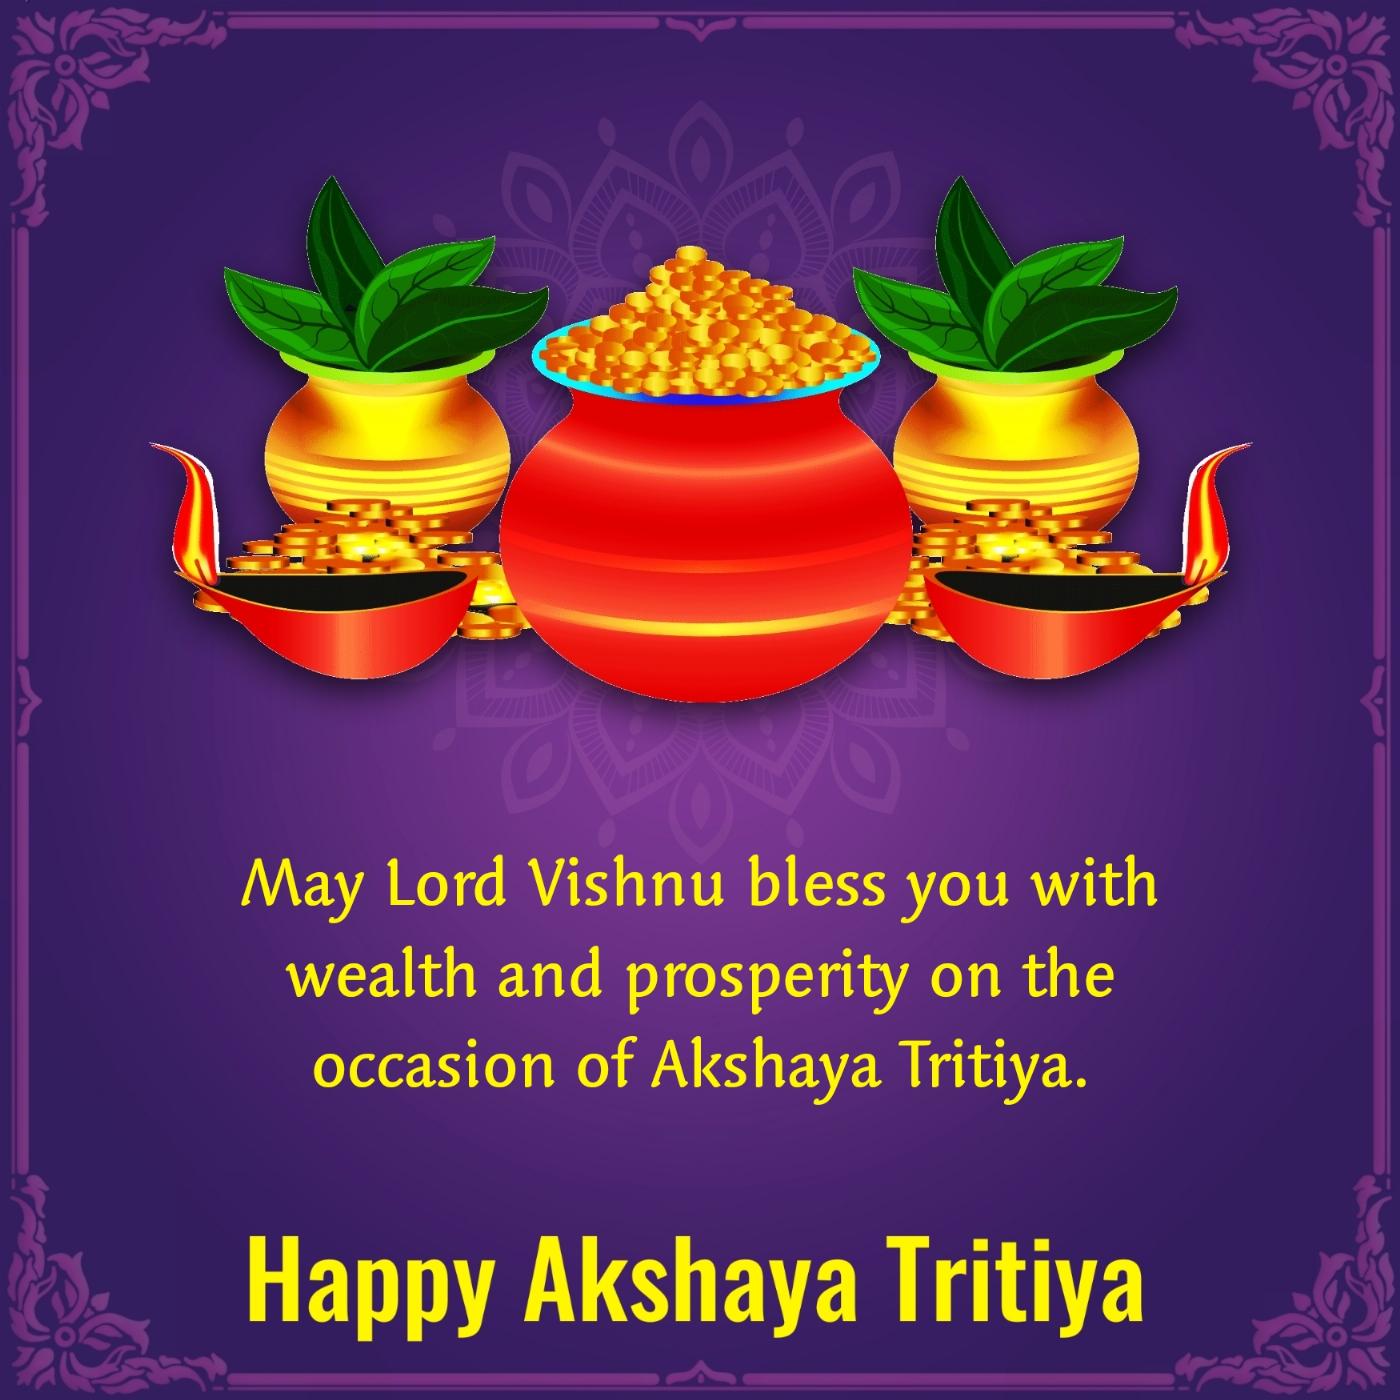 May Lord Vishnu bless you with wealth and prosperity